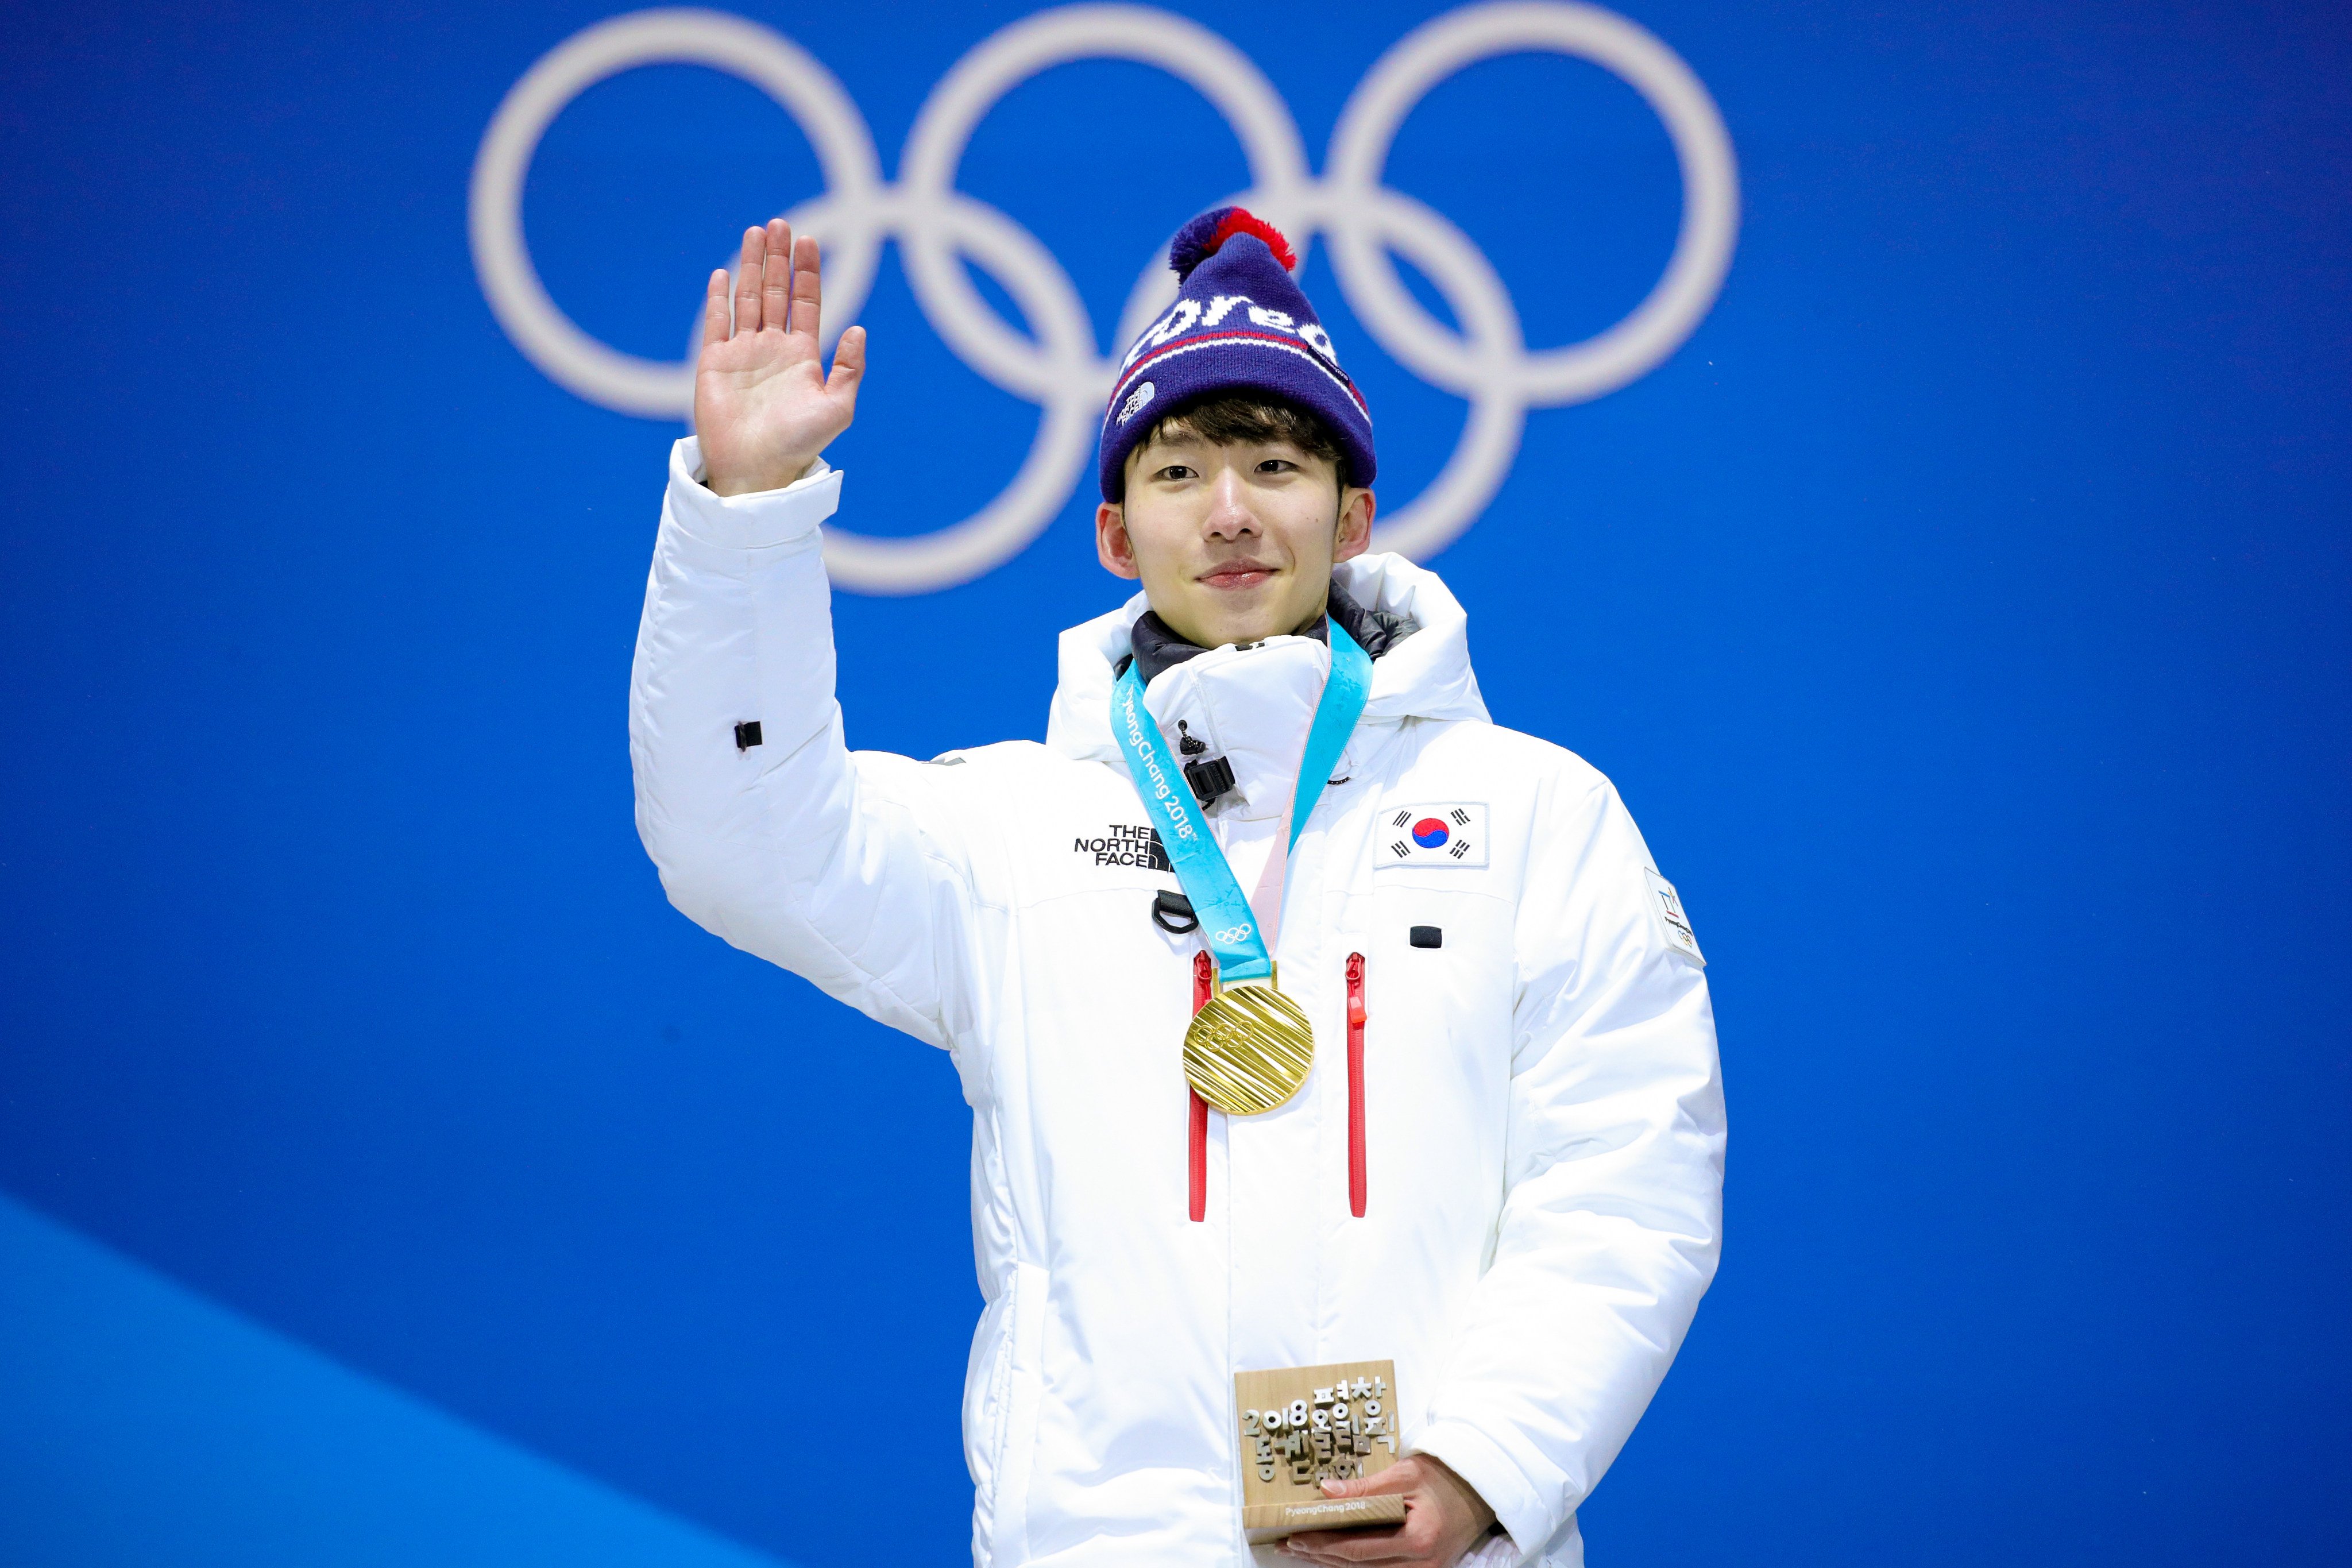 Lin, known then as Lim Hyo-jun, won gold for South Korea at the 2018 Winter Olympics. Photo: Getty Images